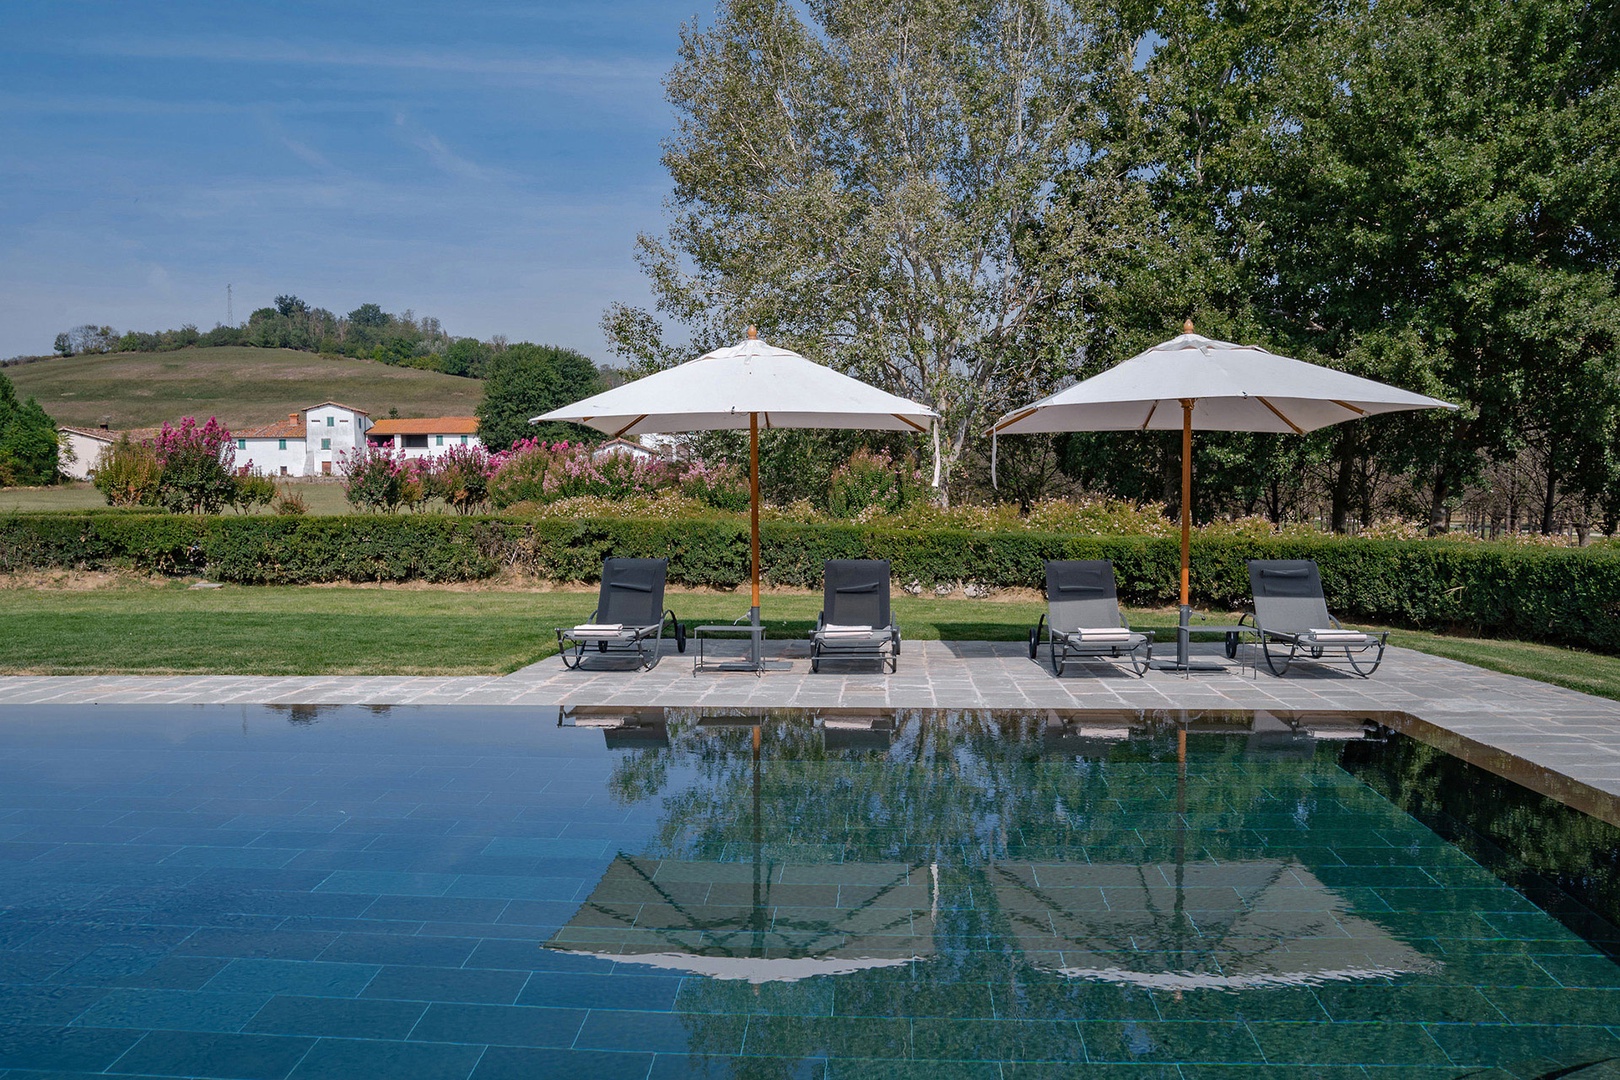 Soak up the Tuscan sun around the private infinity pool.